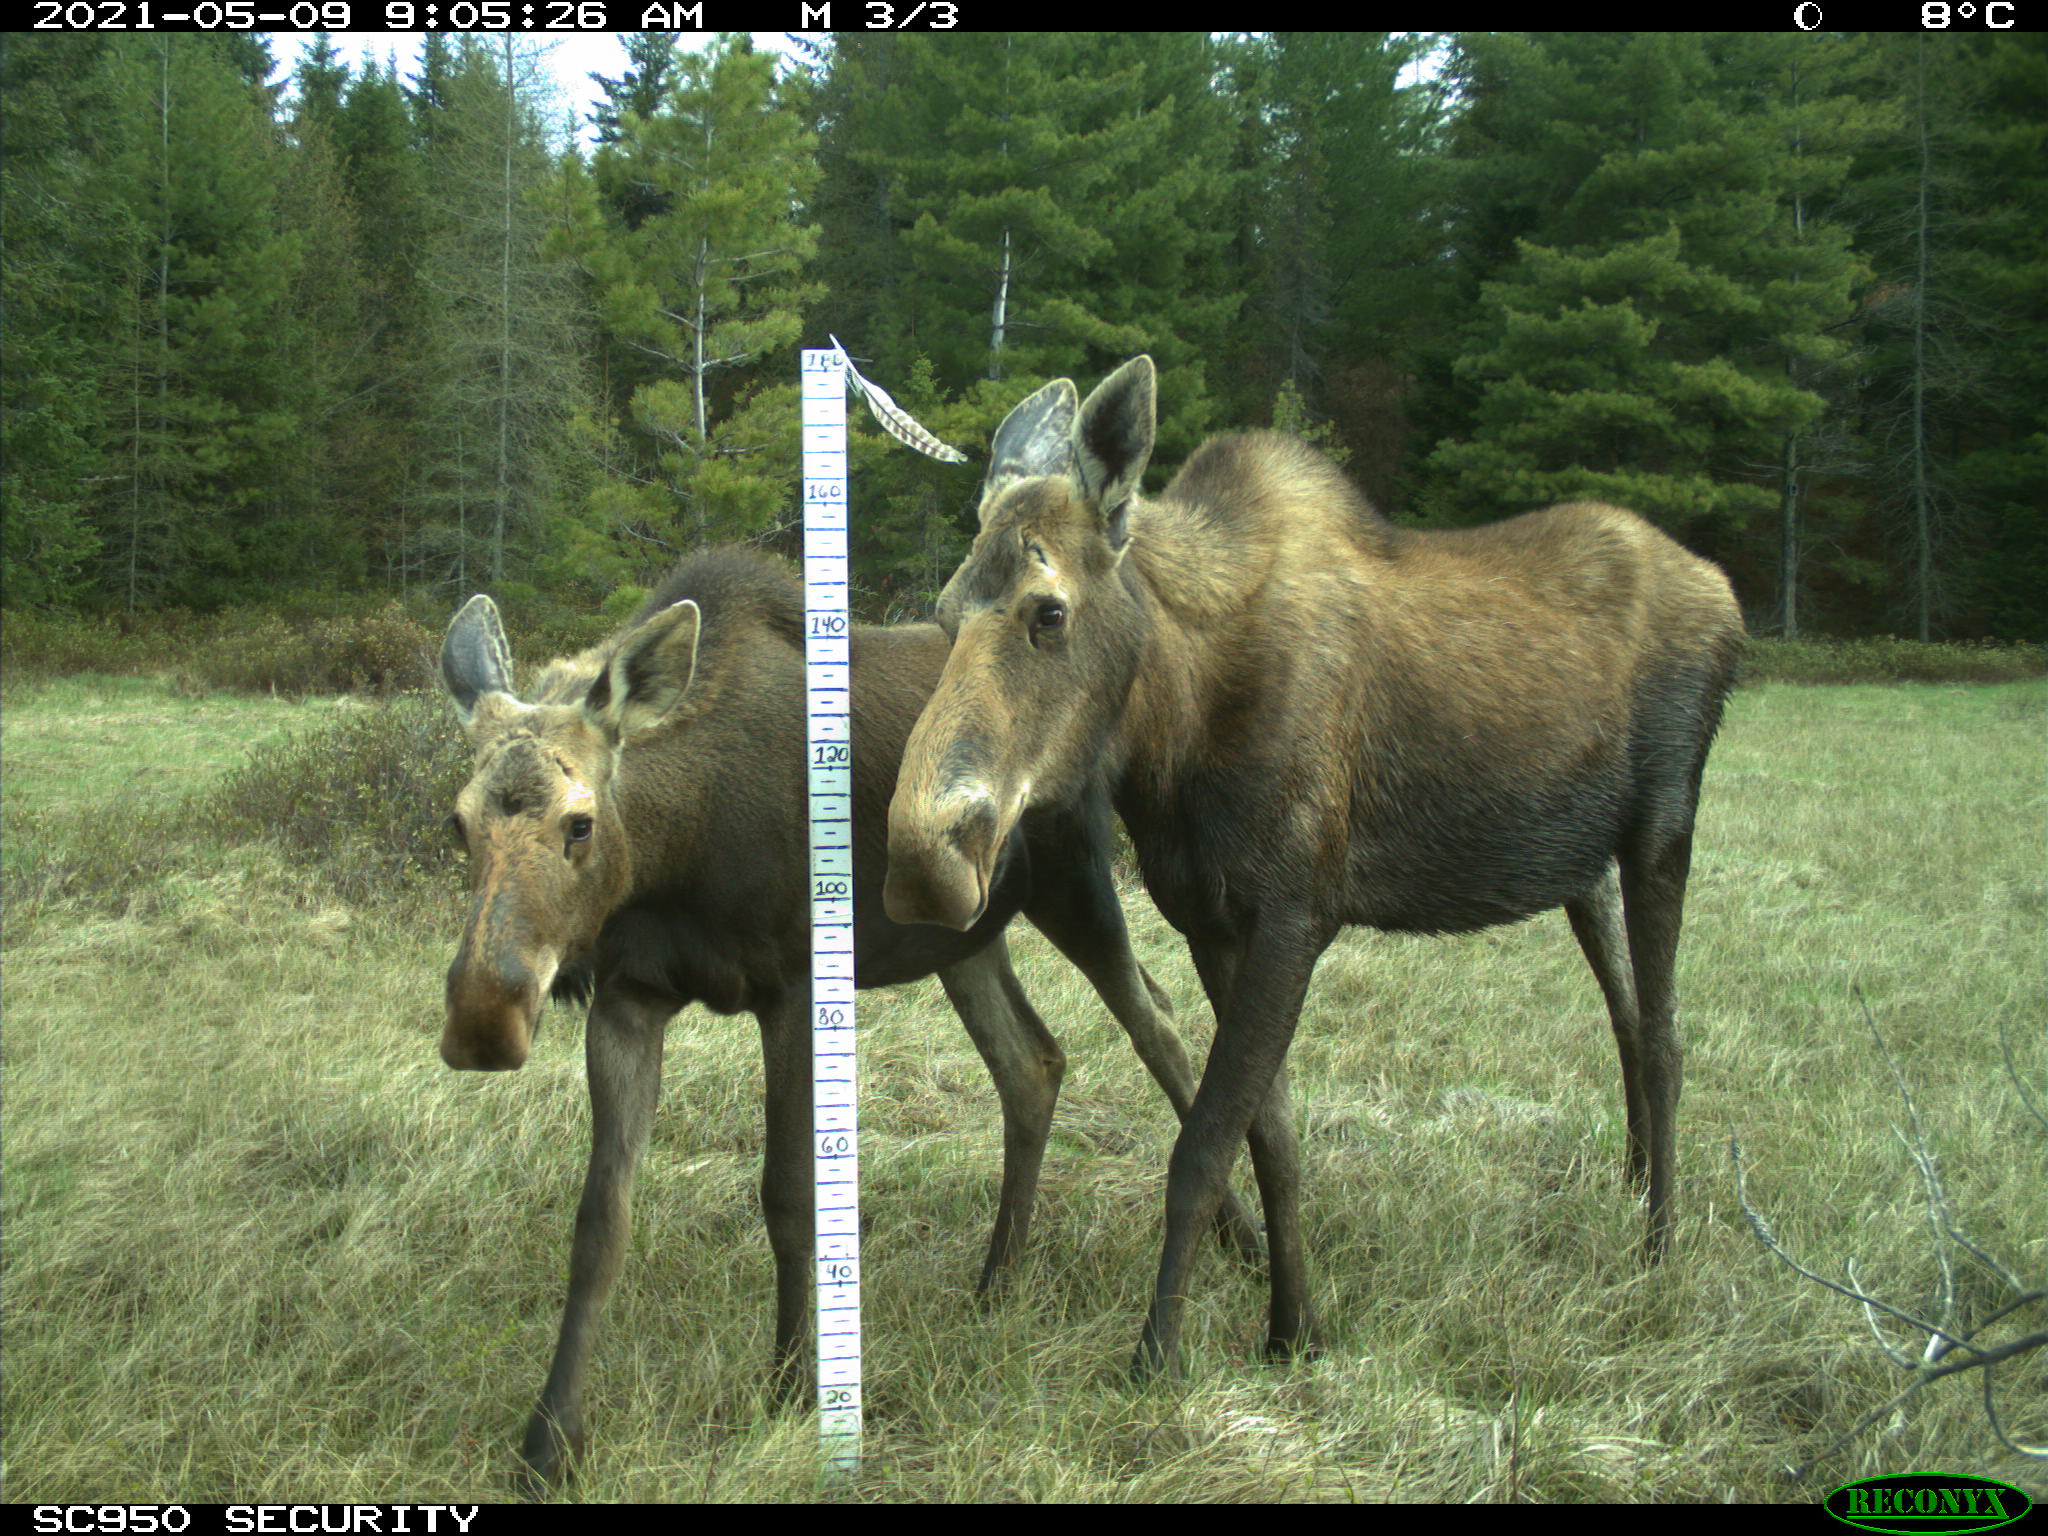 Photo of a mother and baby moose with a tape measure graphic between them.